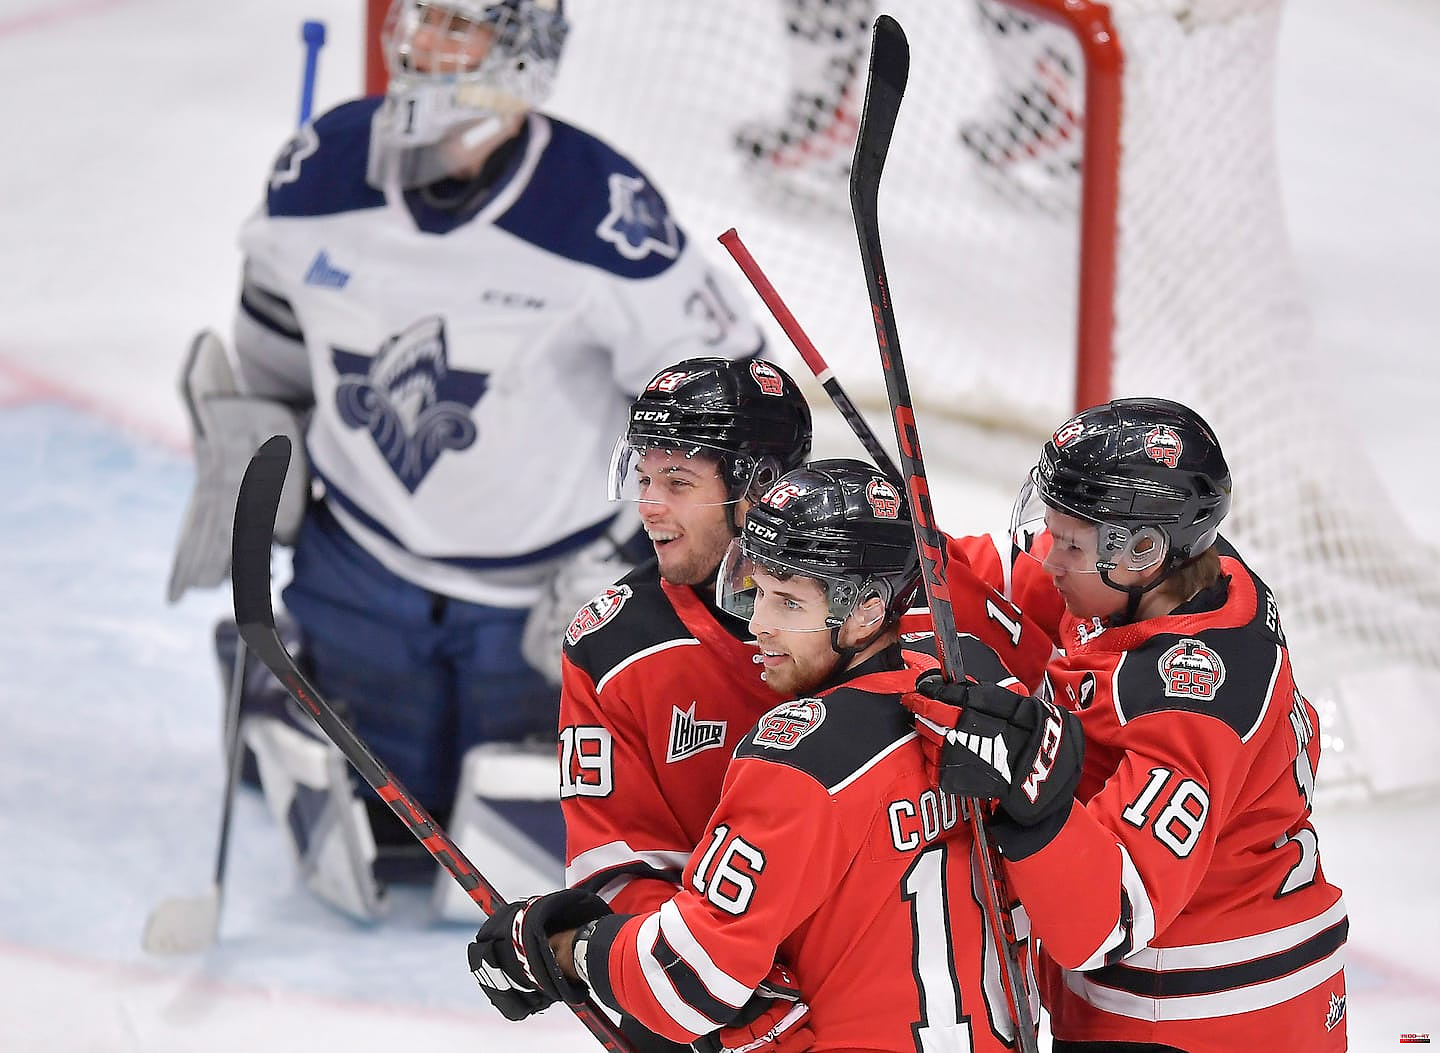 The Remparts in confidence